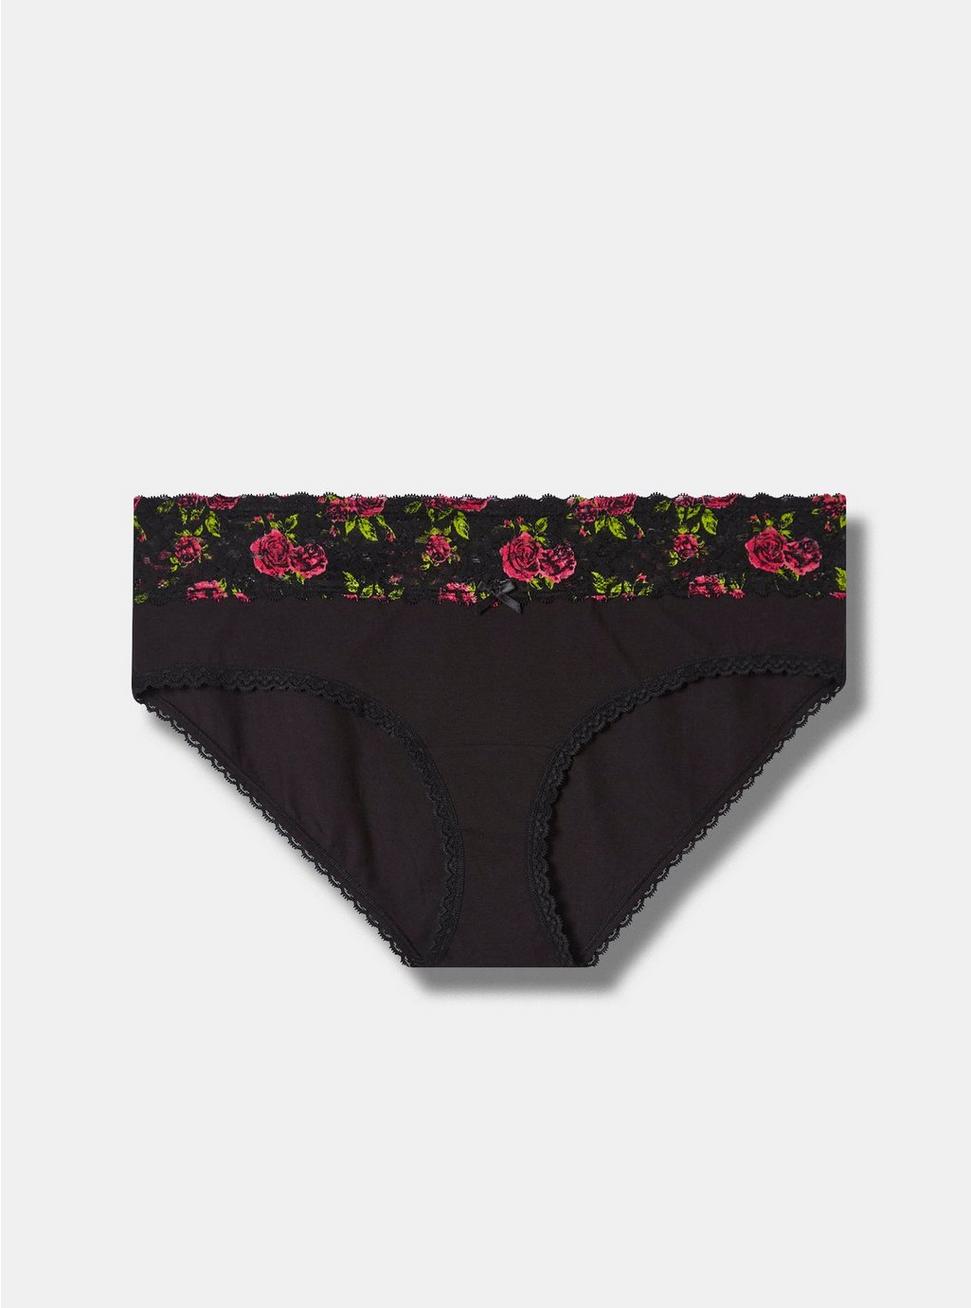 Cotton Mid Rise Hipster Lace Panty, RICH BLACK BRUSHED ROSES FLORAL, hi-res